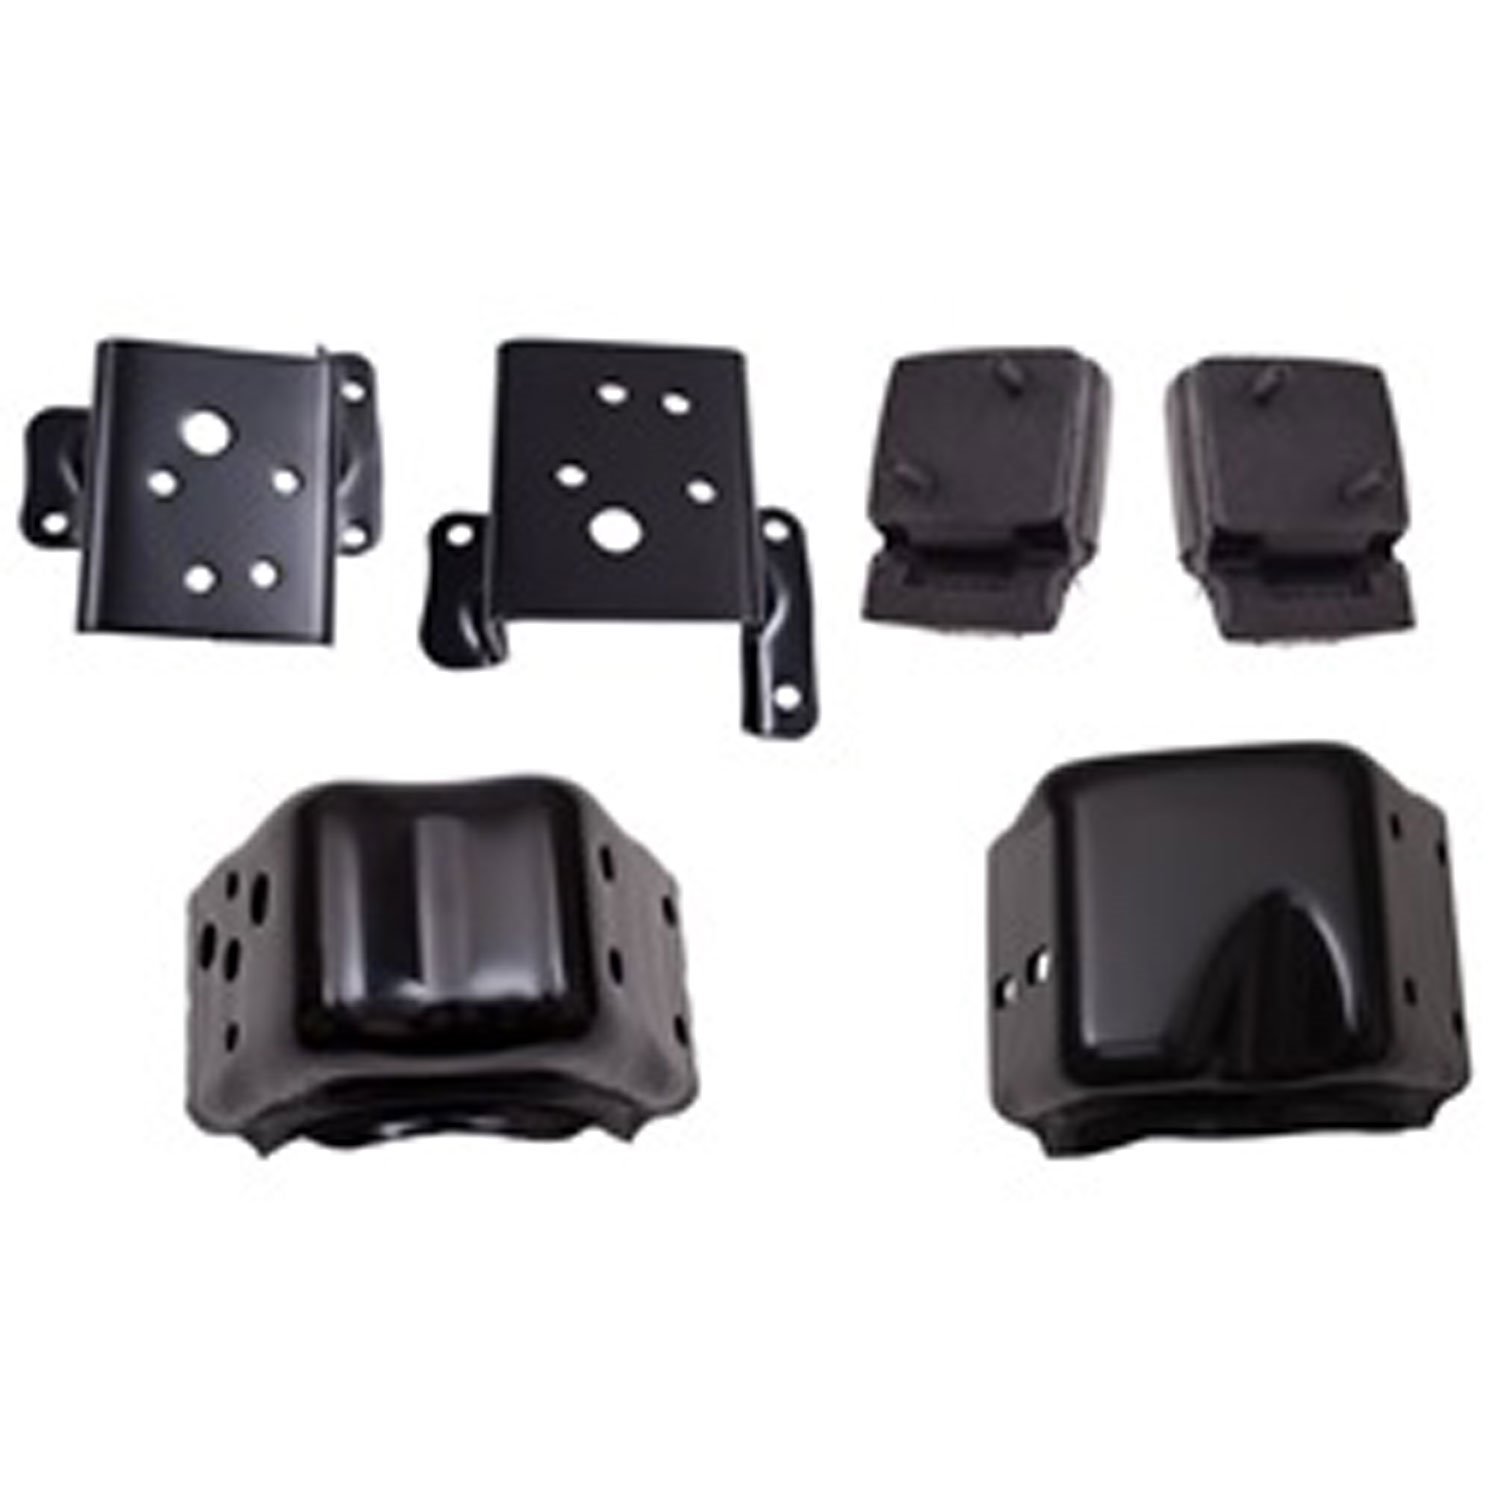 Engine Mounting Kit 5.0L Includes 2 Engine Mounts and 4 Mounting Brackets 1972-1981 Models